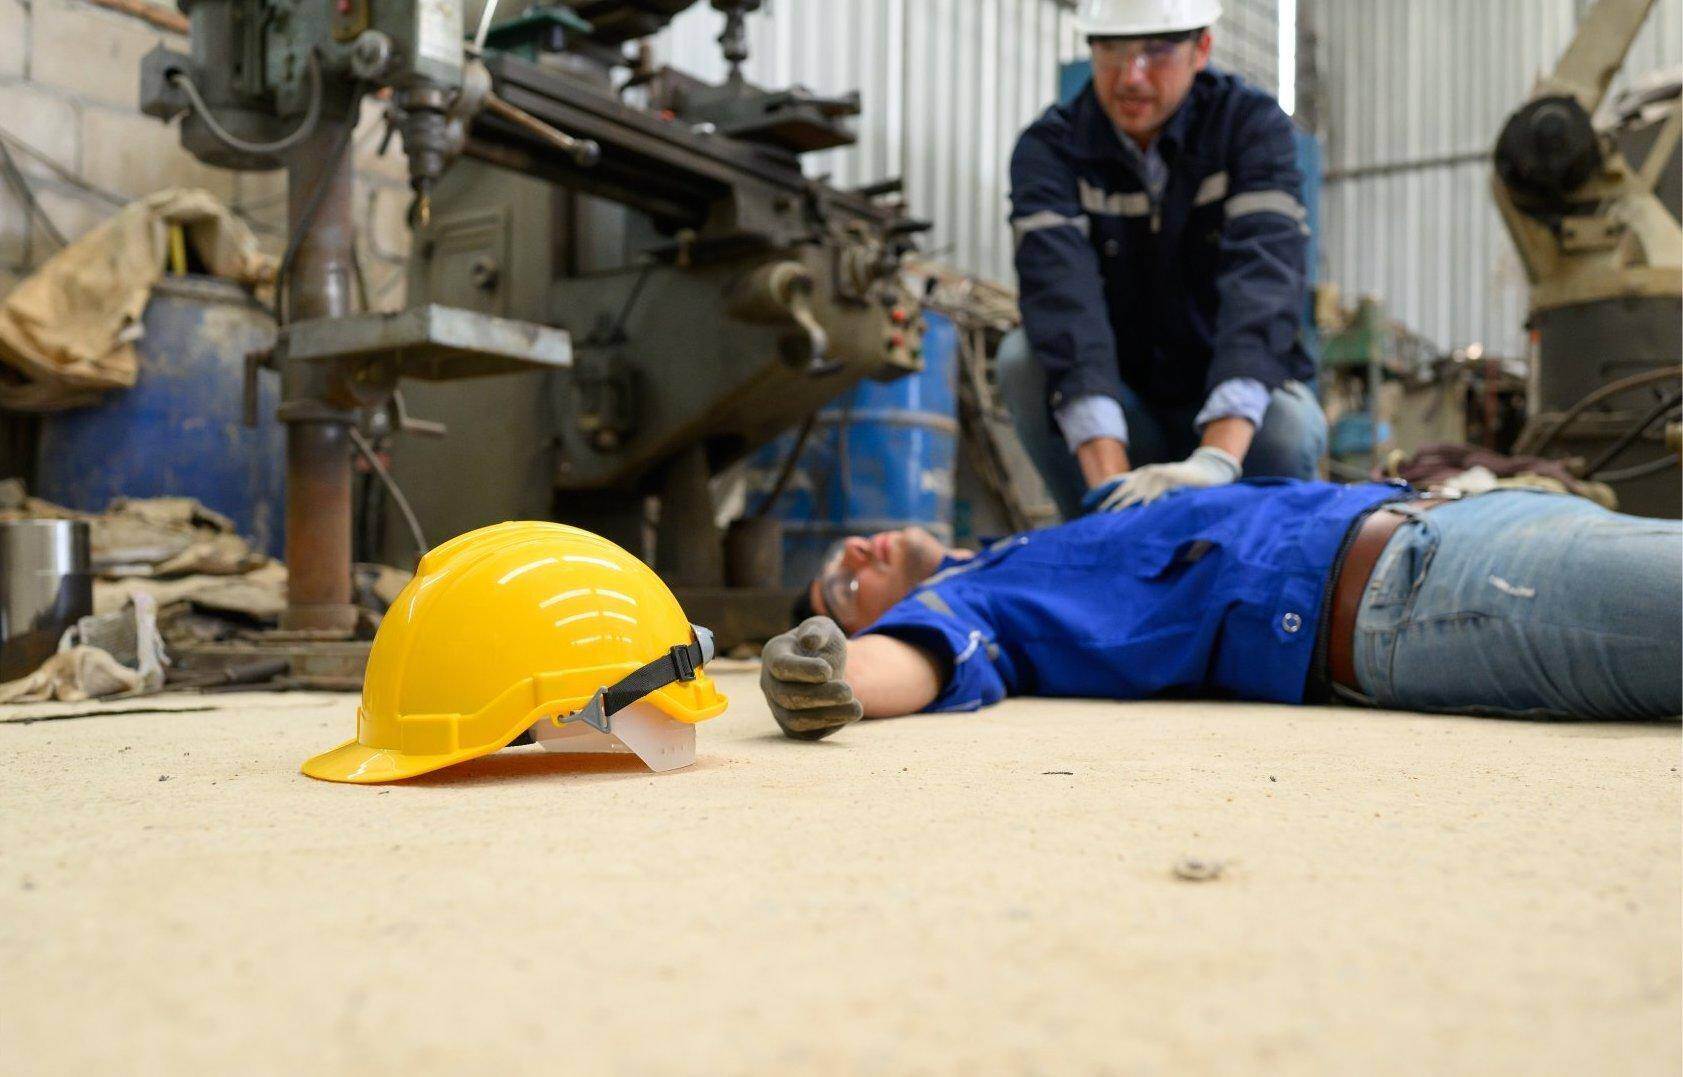 An unconscious man who has been injured on the job who will file for workers compensation in Newnan, Georgia